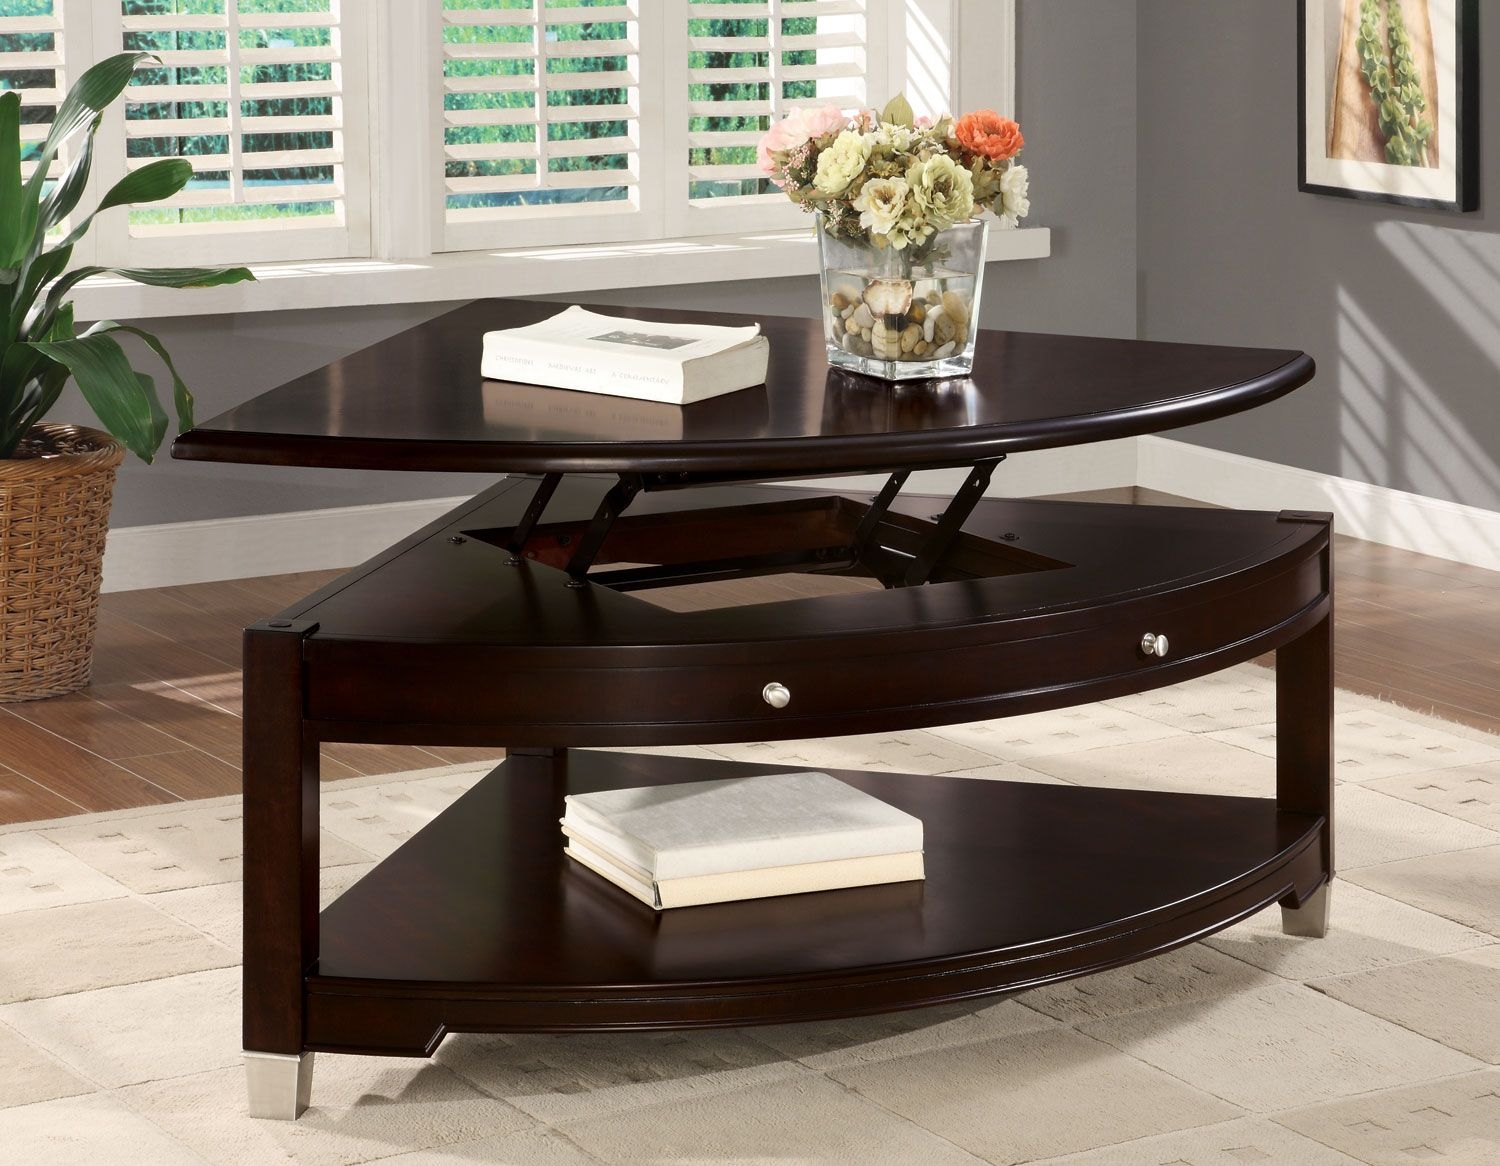 Pie shaped lift top coffee table 1